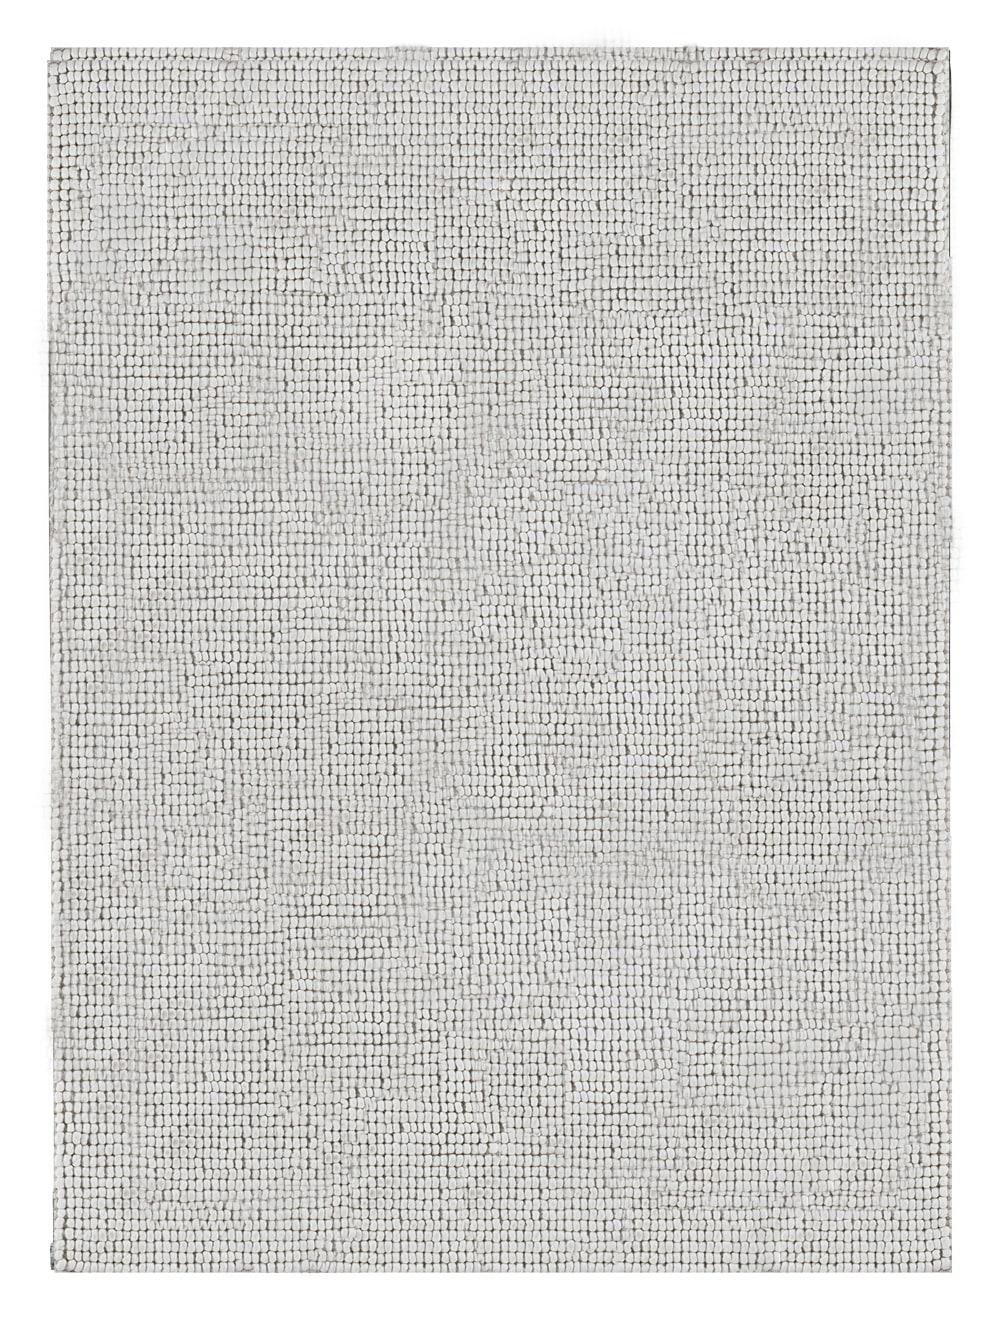 Cream bubbles carpet by Massimo Copenhagen.
Handwoven
Materials: 100% Felted New Zealand wool.
Dimensions: W 200 x H 300 cm.
Available colors: Cream and Mixed Grey.
Other dimensions are available: 140x200 cm, 170x240 cm, and special